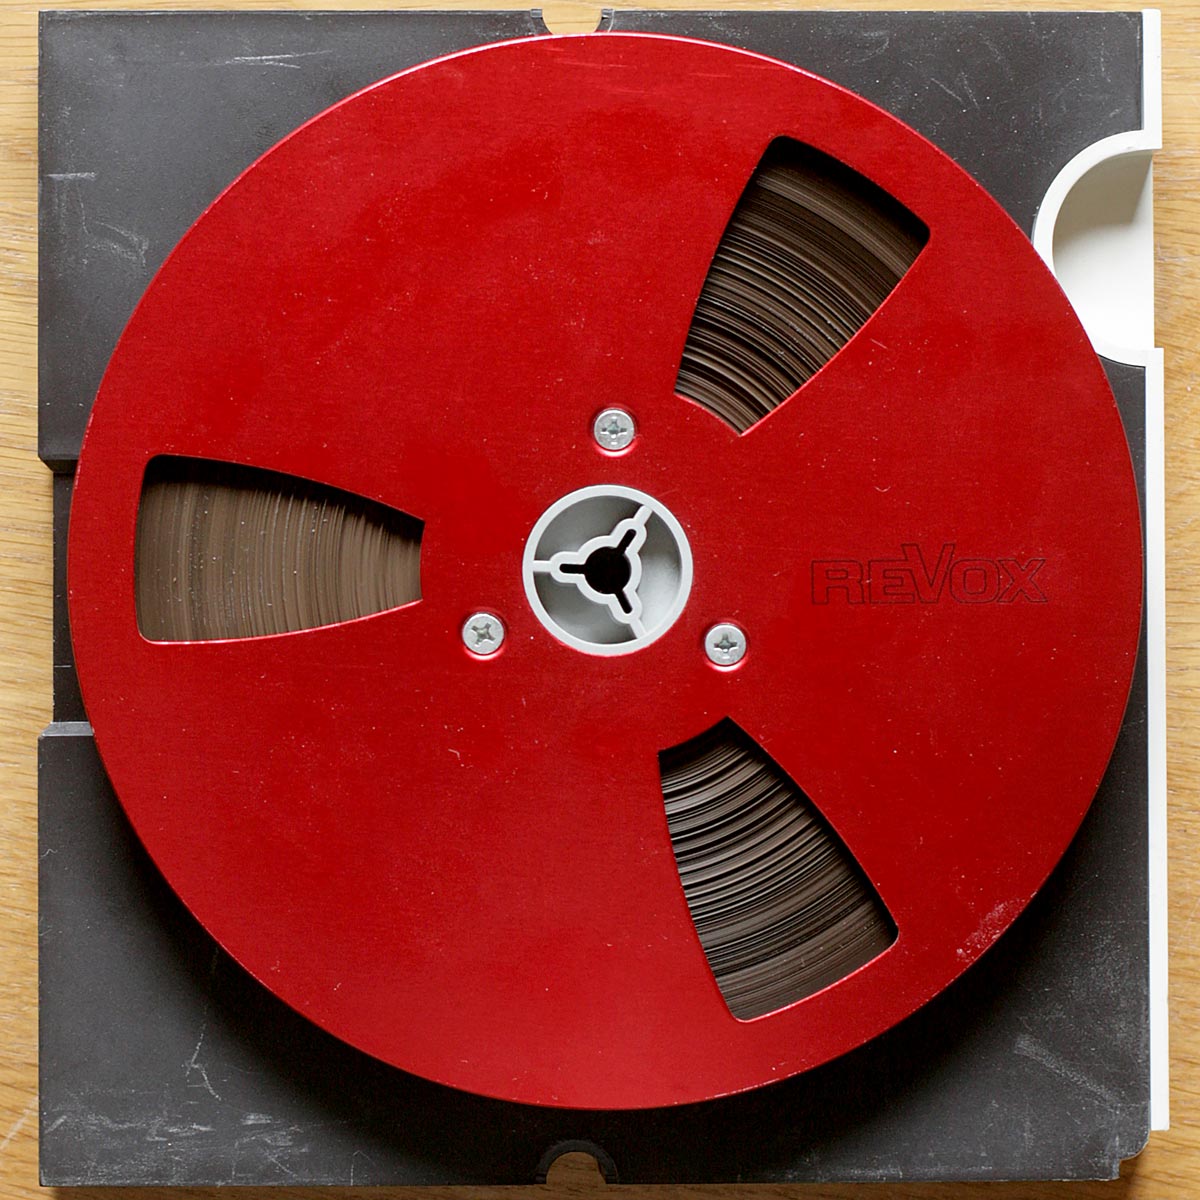 Revox • Bande magnétique avec bobine métallique rouge • Sound recording tape with red metal reel • Spielband mit rote Metallspule • Ø 18 cm • Occasion • Used • Gebraucht